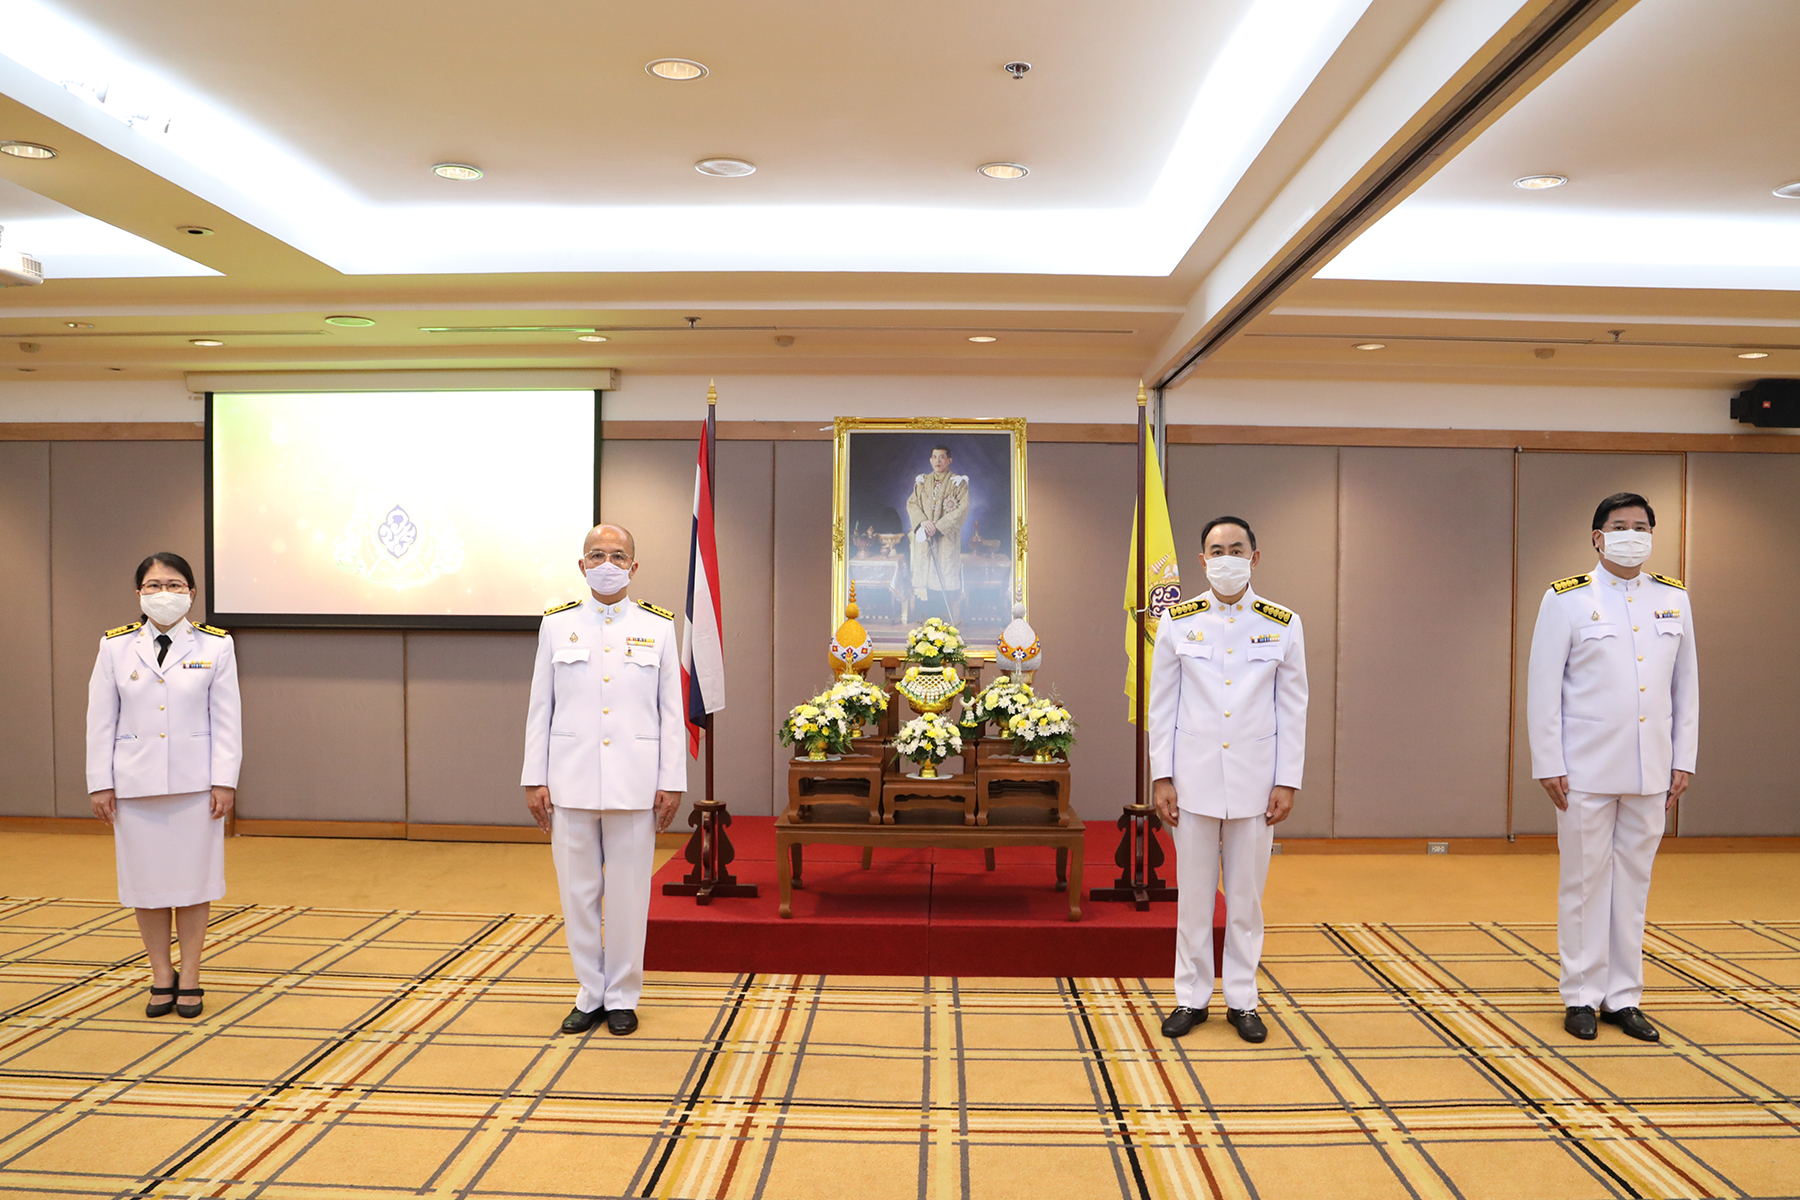 EXIM Thailand Holds Well-wishing Ceremony on Coronation Day 2020